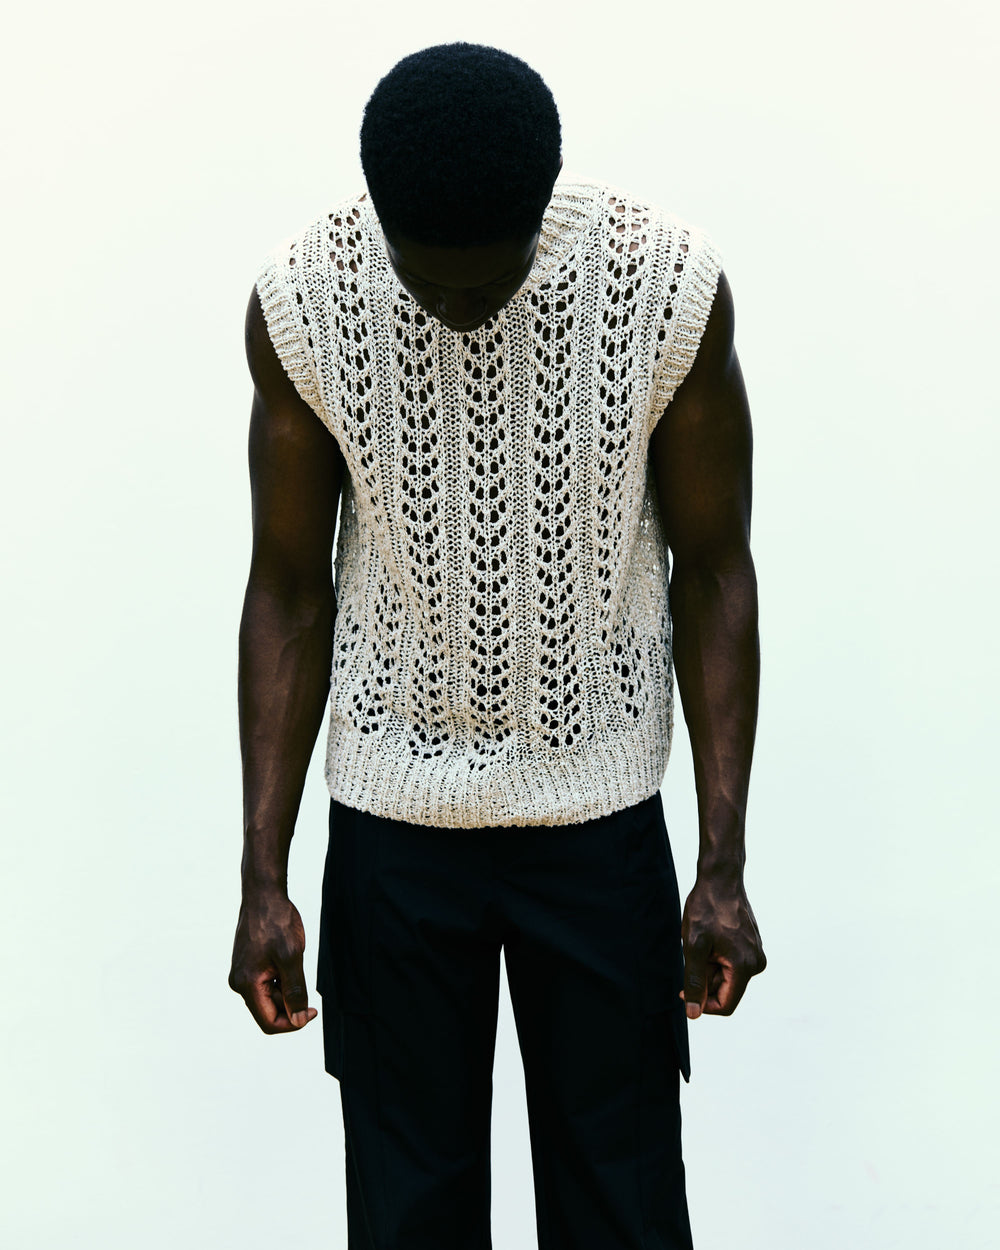 _J.L - A.L_ Model wearing Redos Knitted vest from _J.L-A.L_